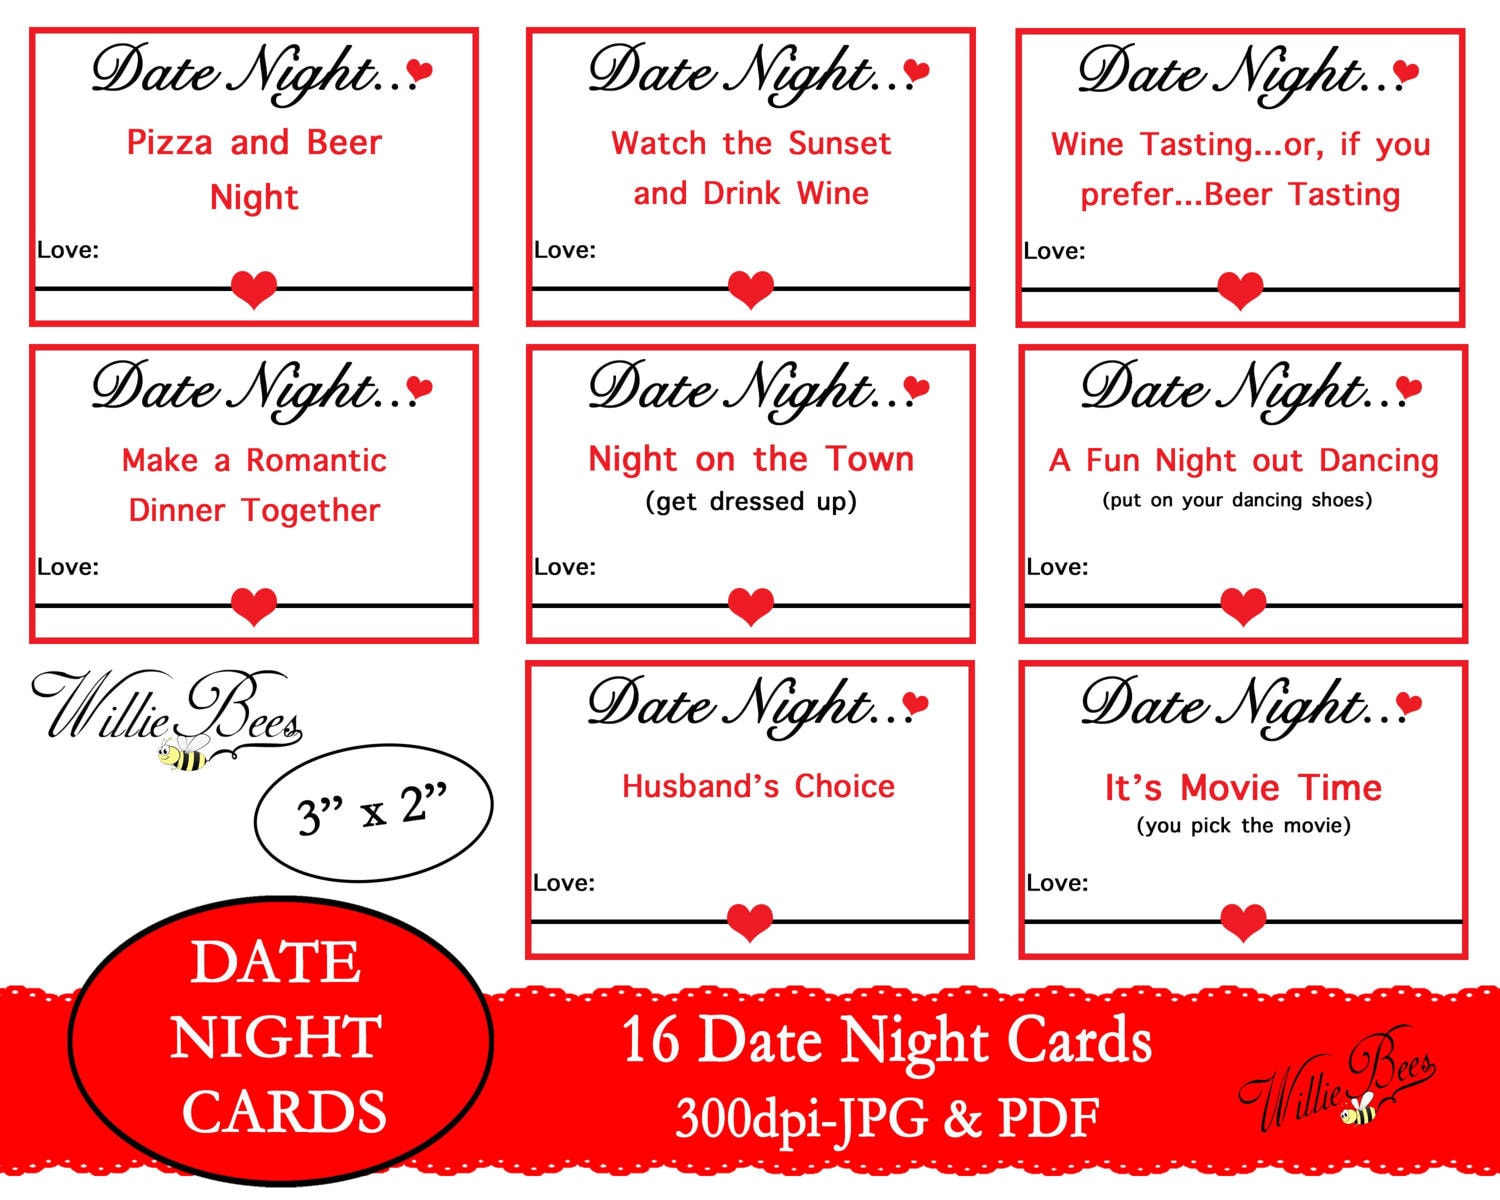 Date Night Coupons Love Cards Love Coupons Date Ideas